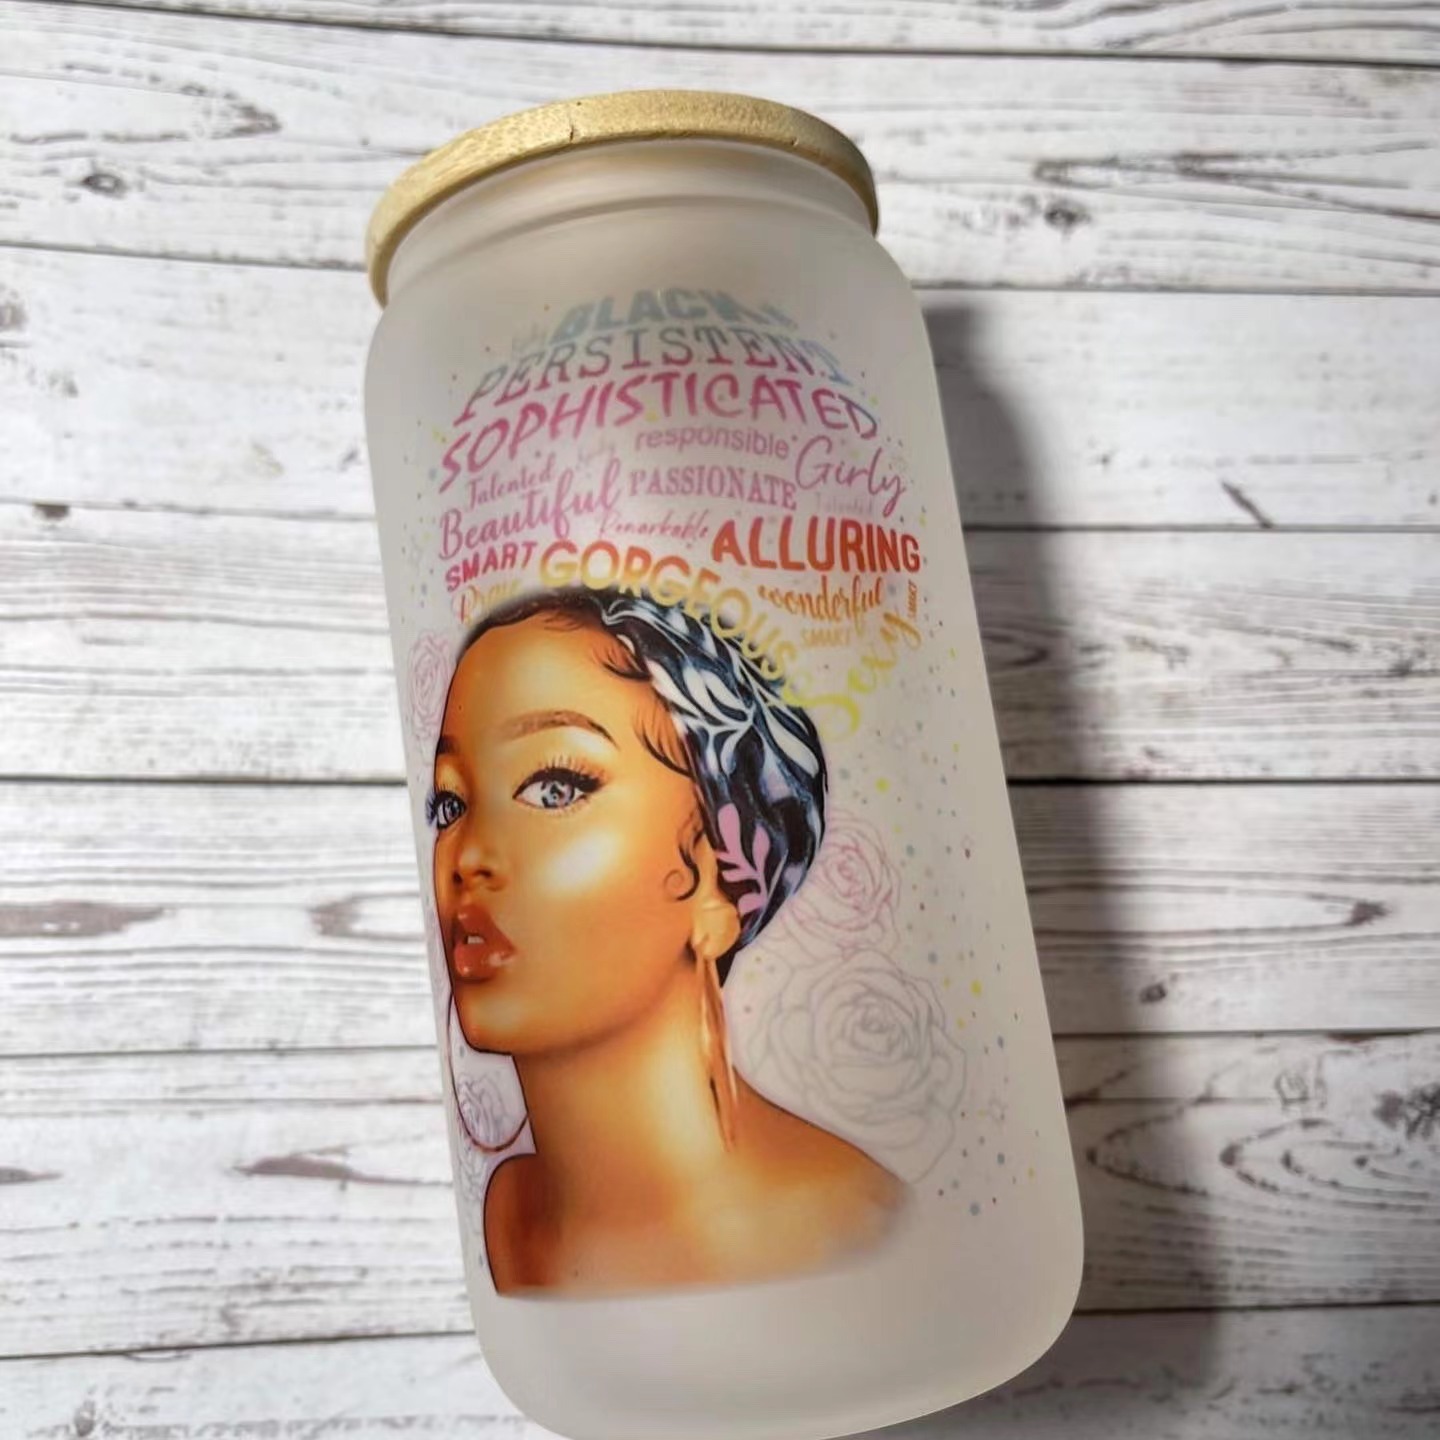 RTS 16oz Sublimation Ready Glass Can tumblers with bamboo lid and plas